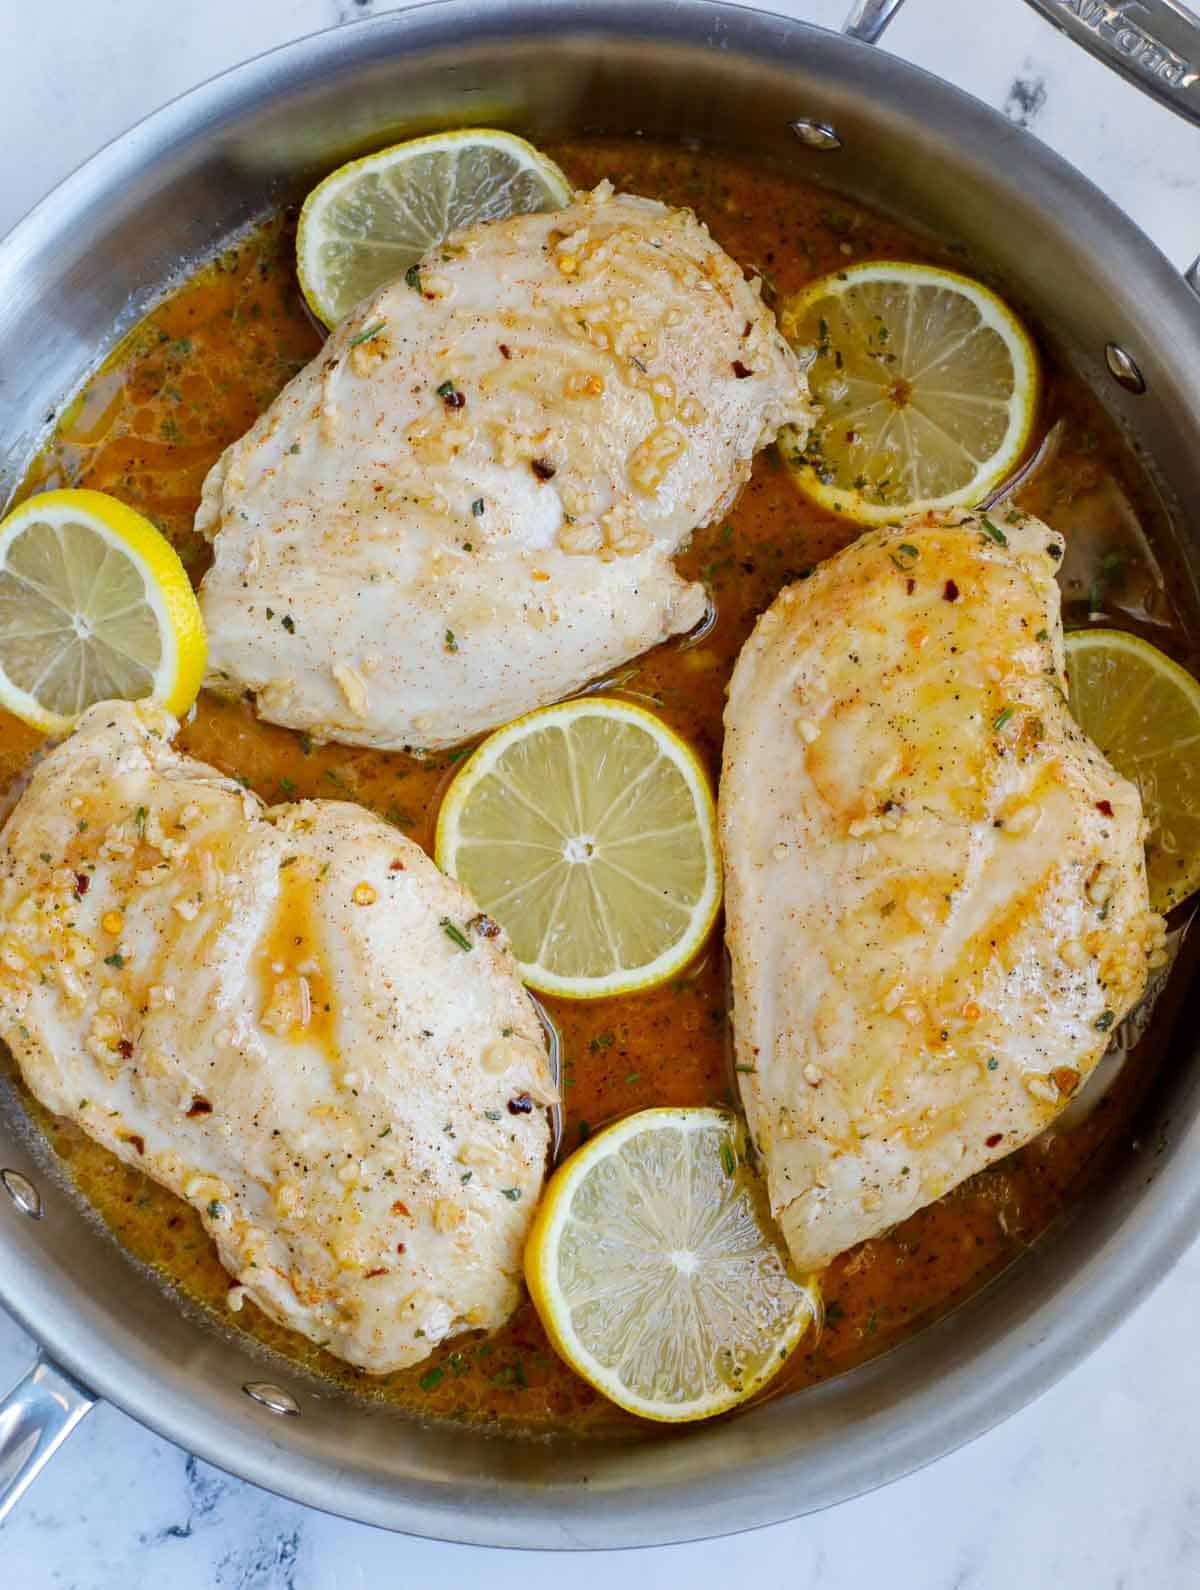 Sauted chicken breasts with lemon rosemary sauce poured over.